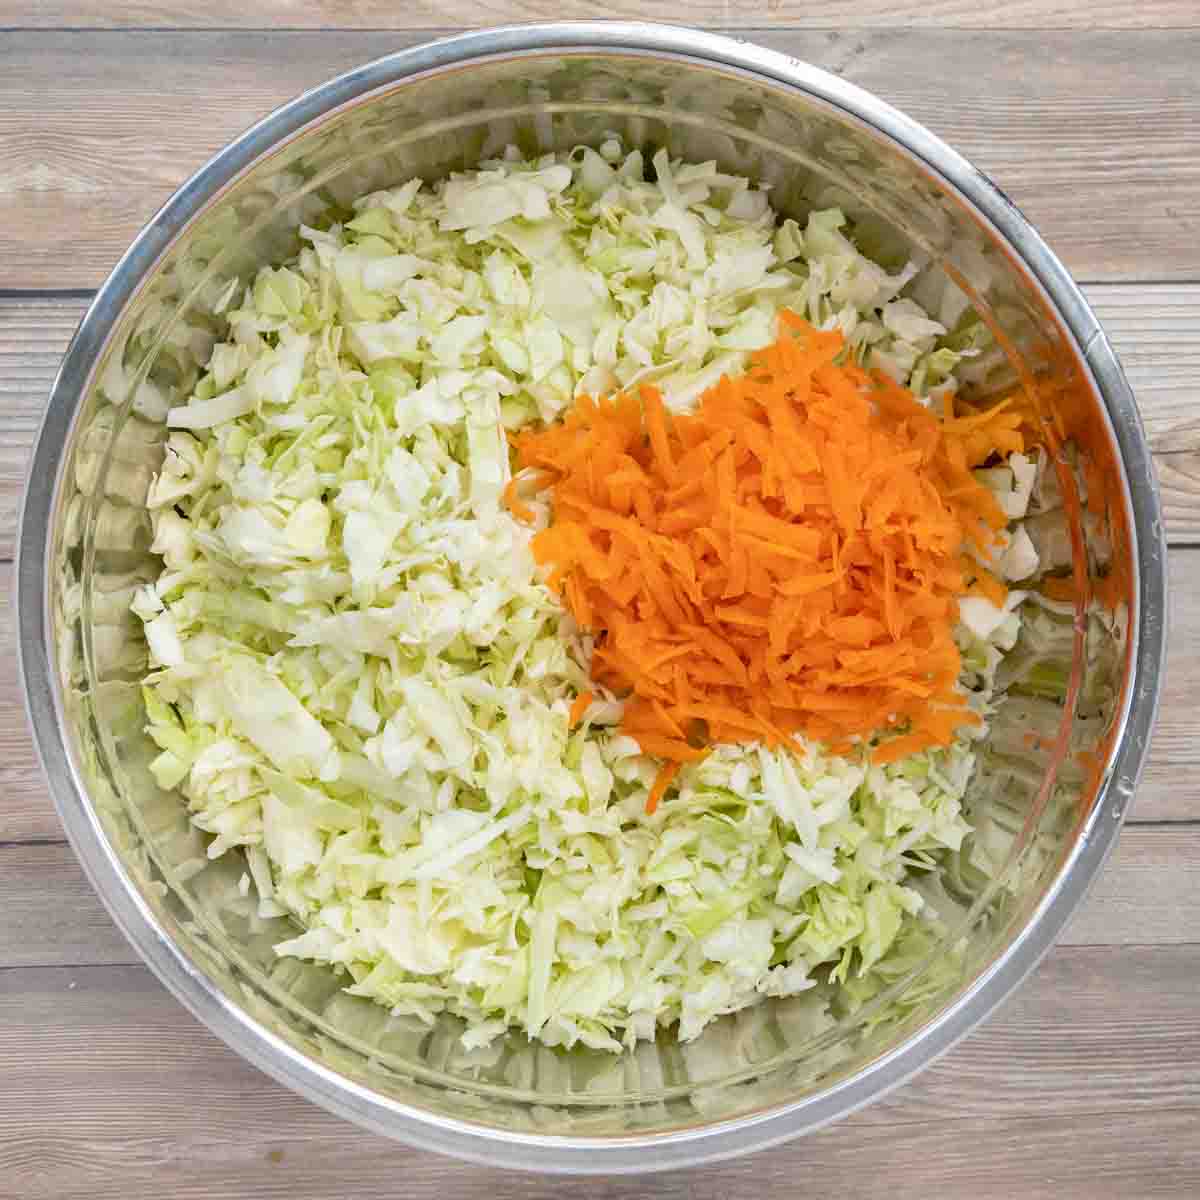 shredded carrots added to bowl of chopped cabbage.